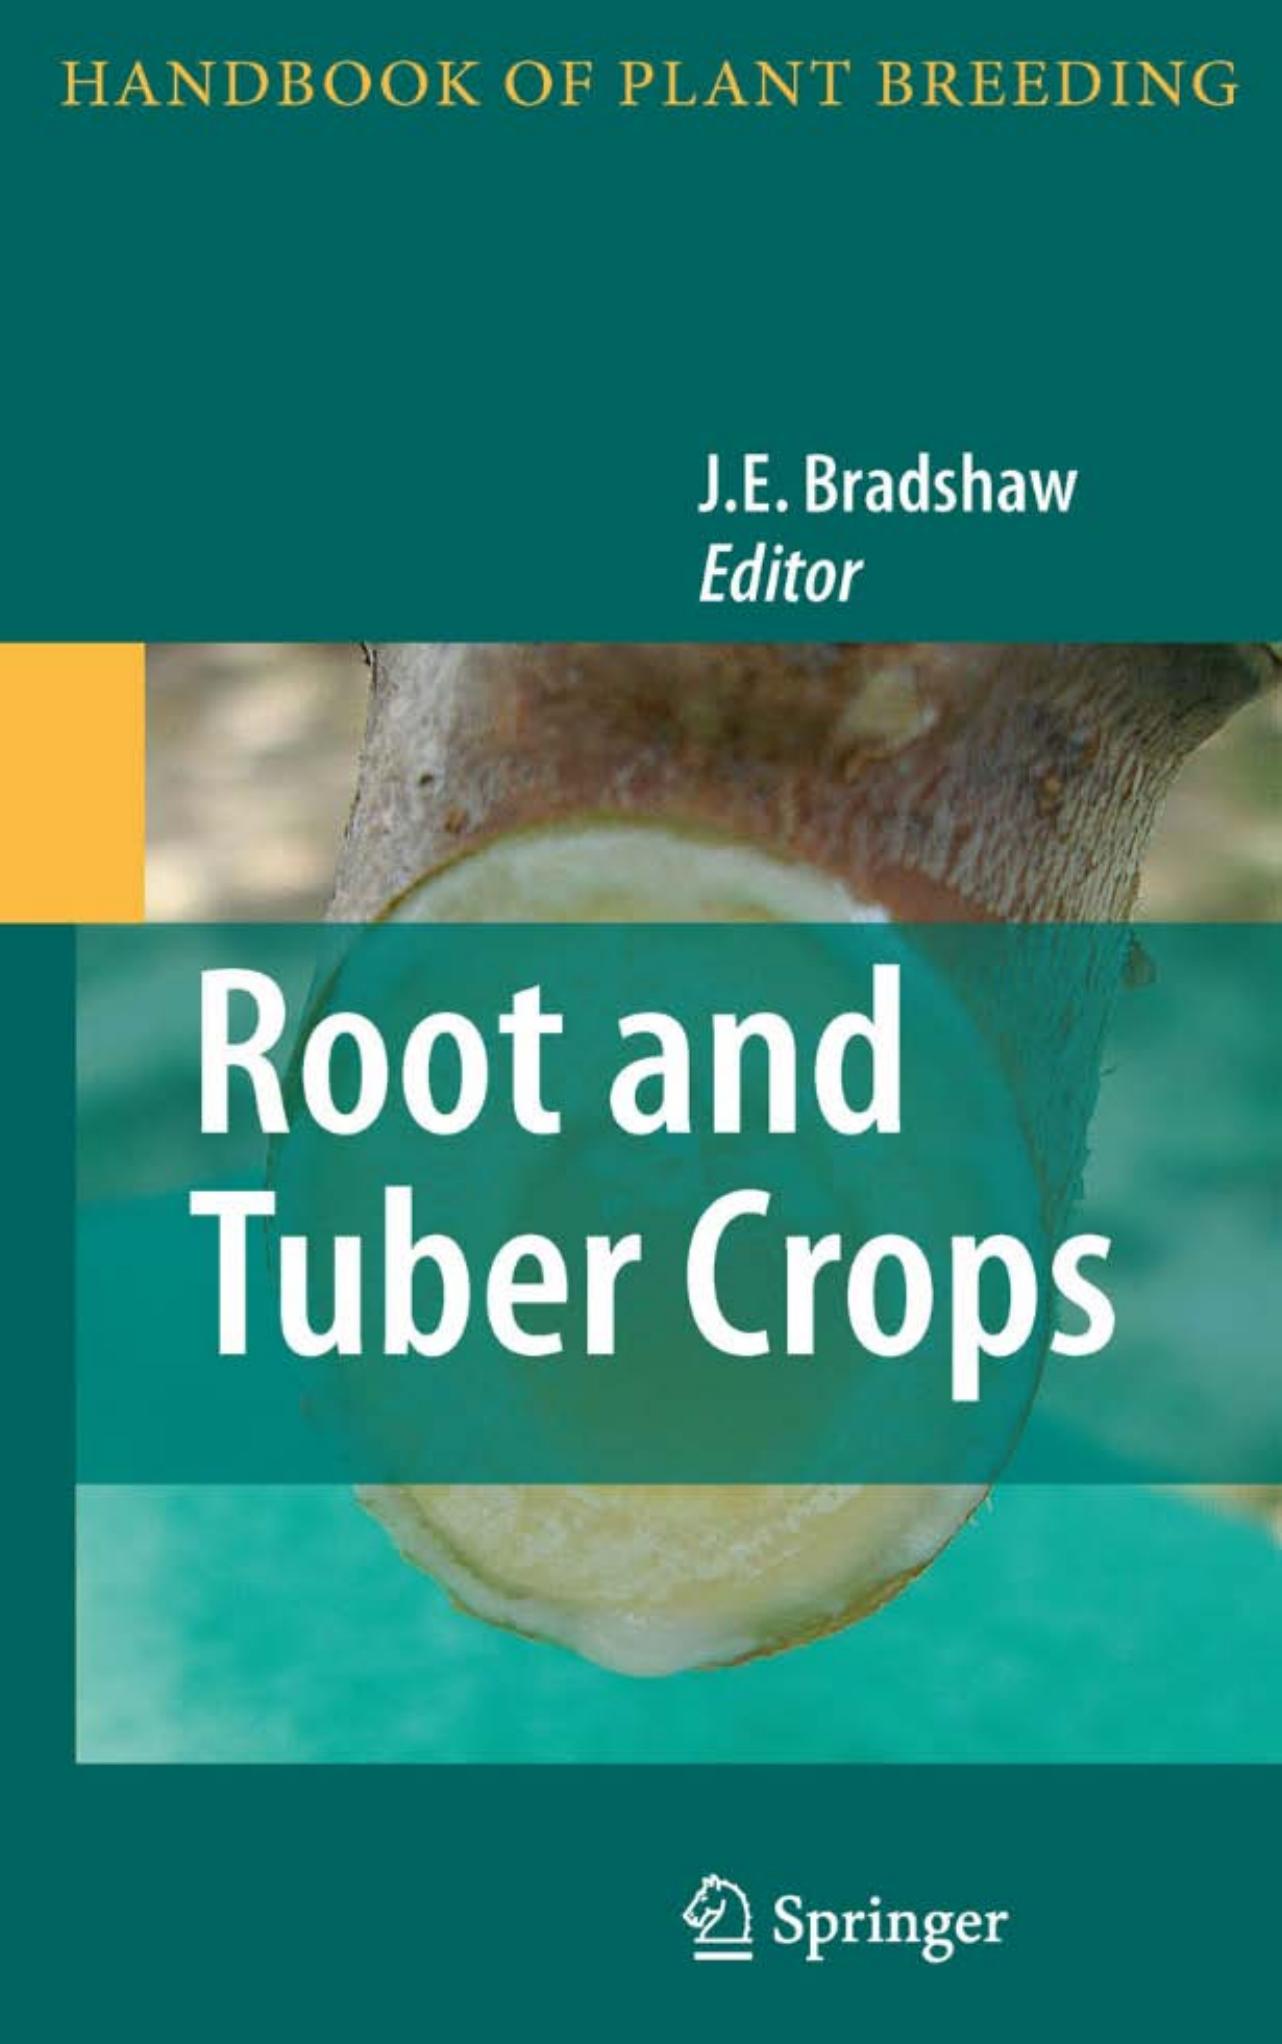 Root and Tuber Crops (Handbook of Plant Breeding)